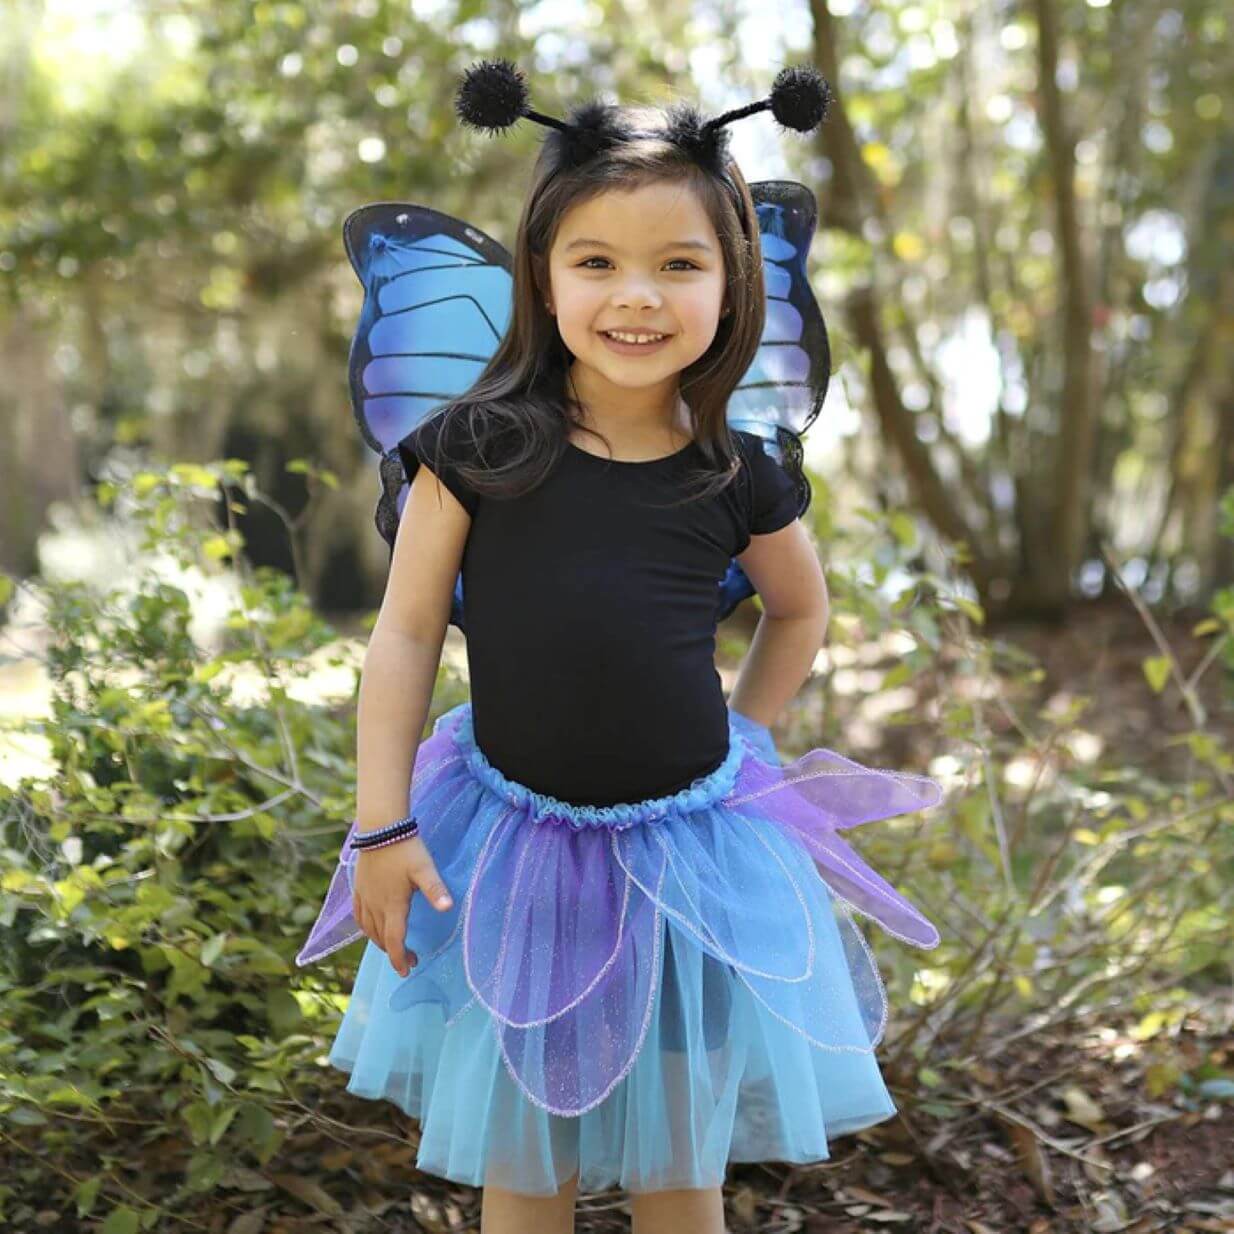 young girl in black top with blue and purple petal tutu skirt, blue and purple butterfly wings and black headband with butterfly antenna